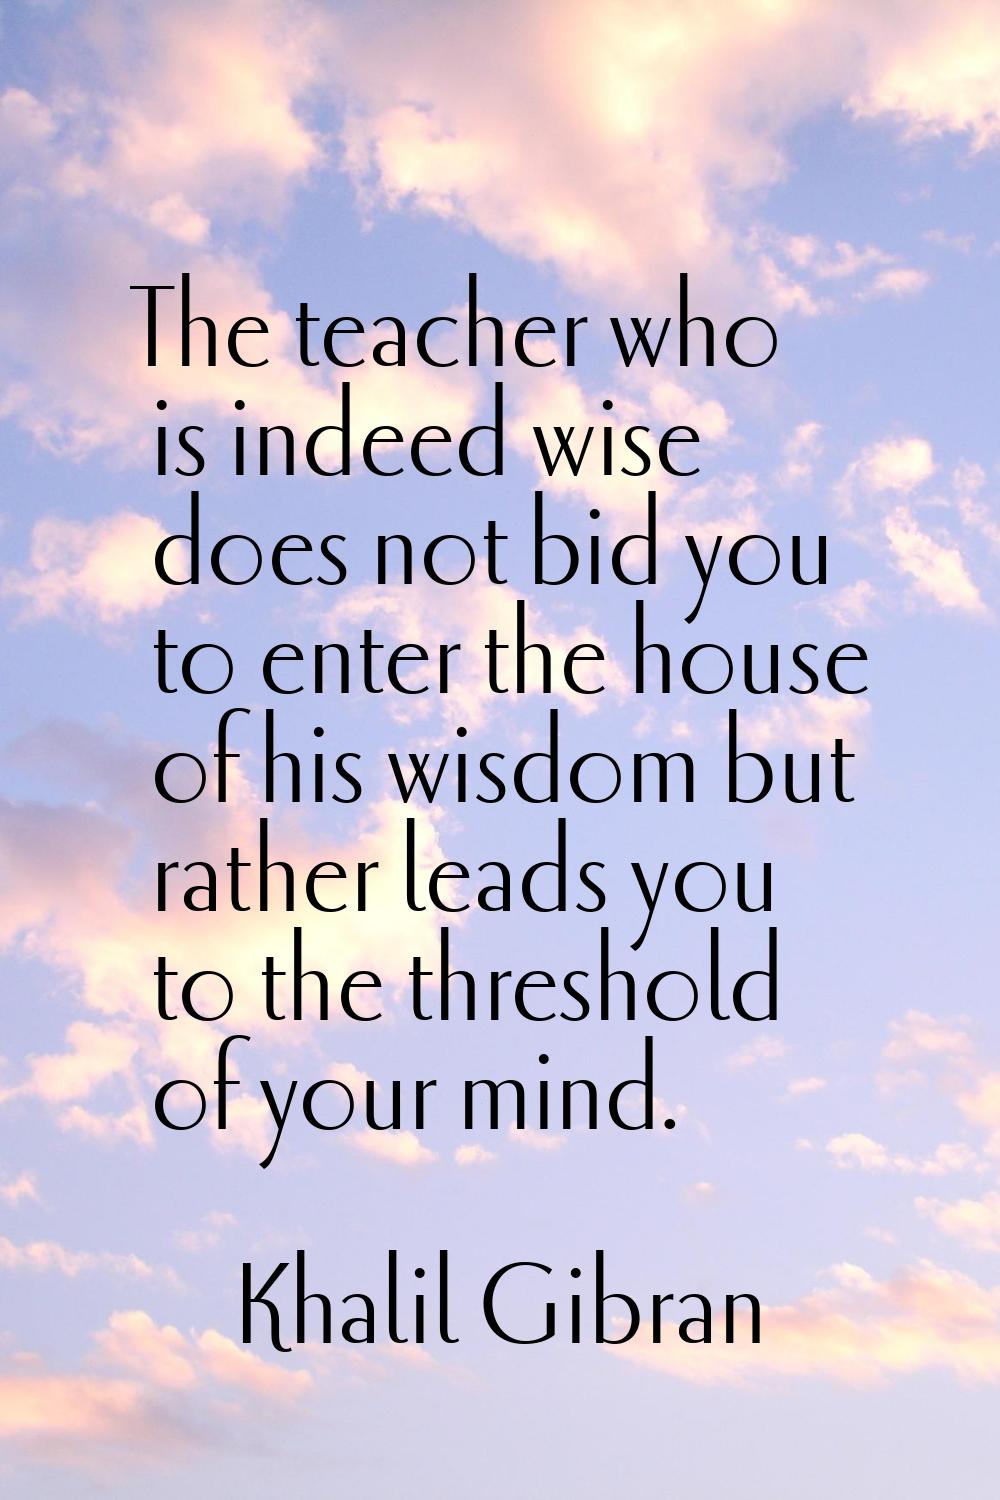 The teacher who is indeed wise does not bid you to enter the house of his wisdom but rather leads y